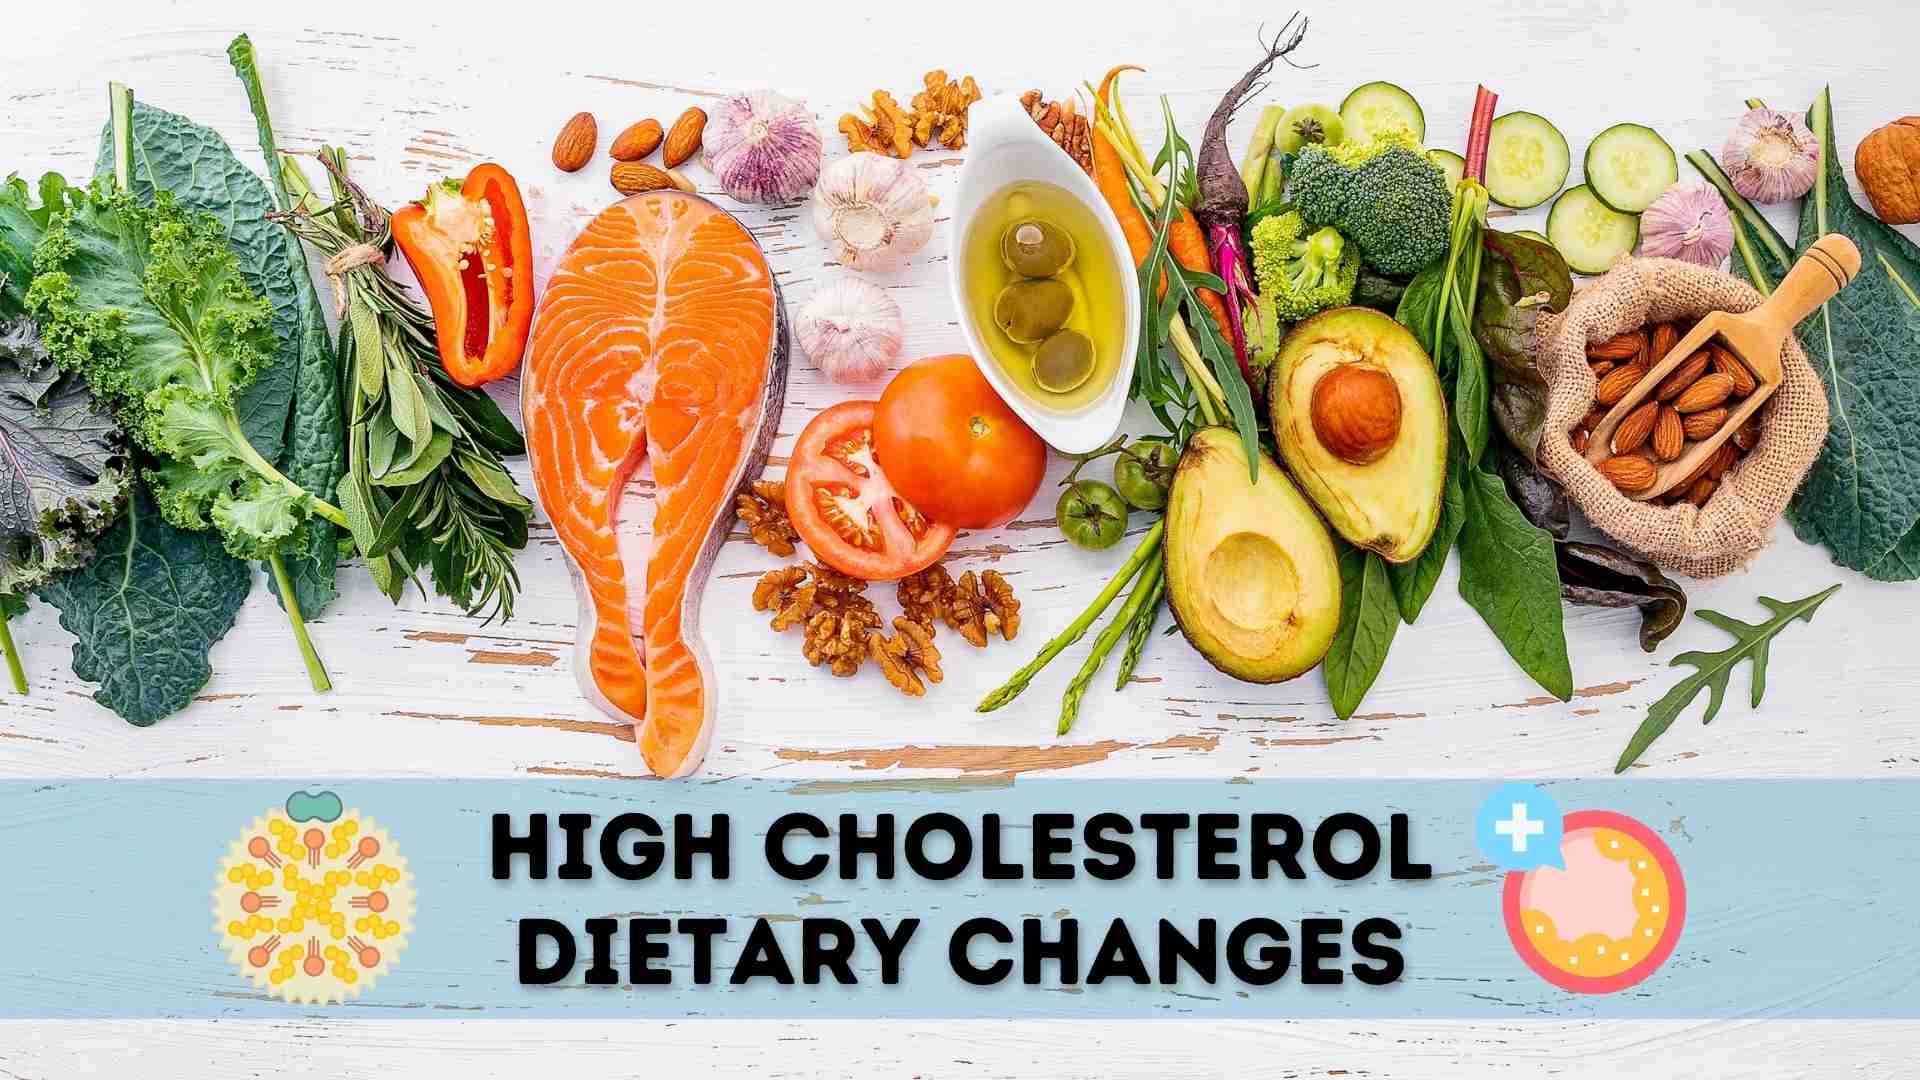 High Cholesterol-Dietary Changes